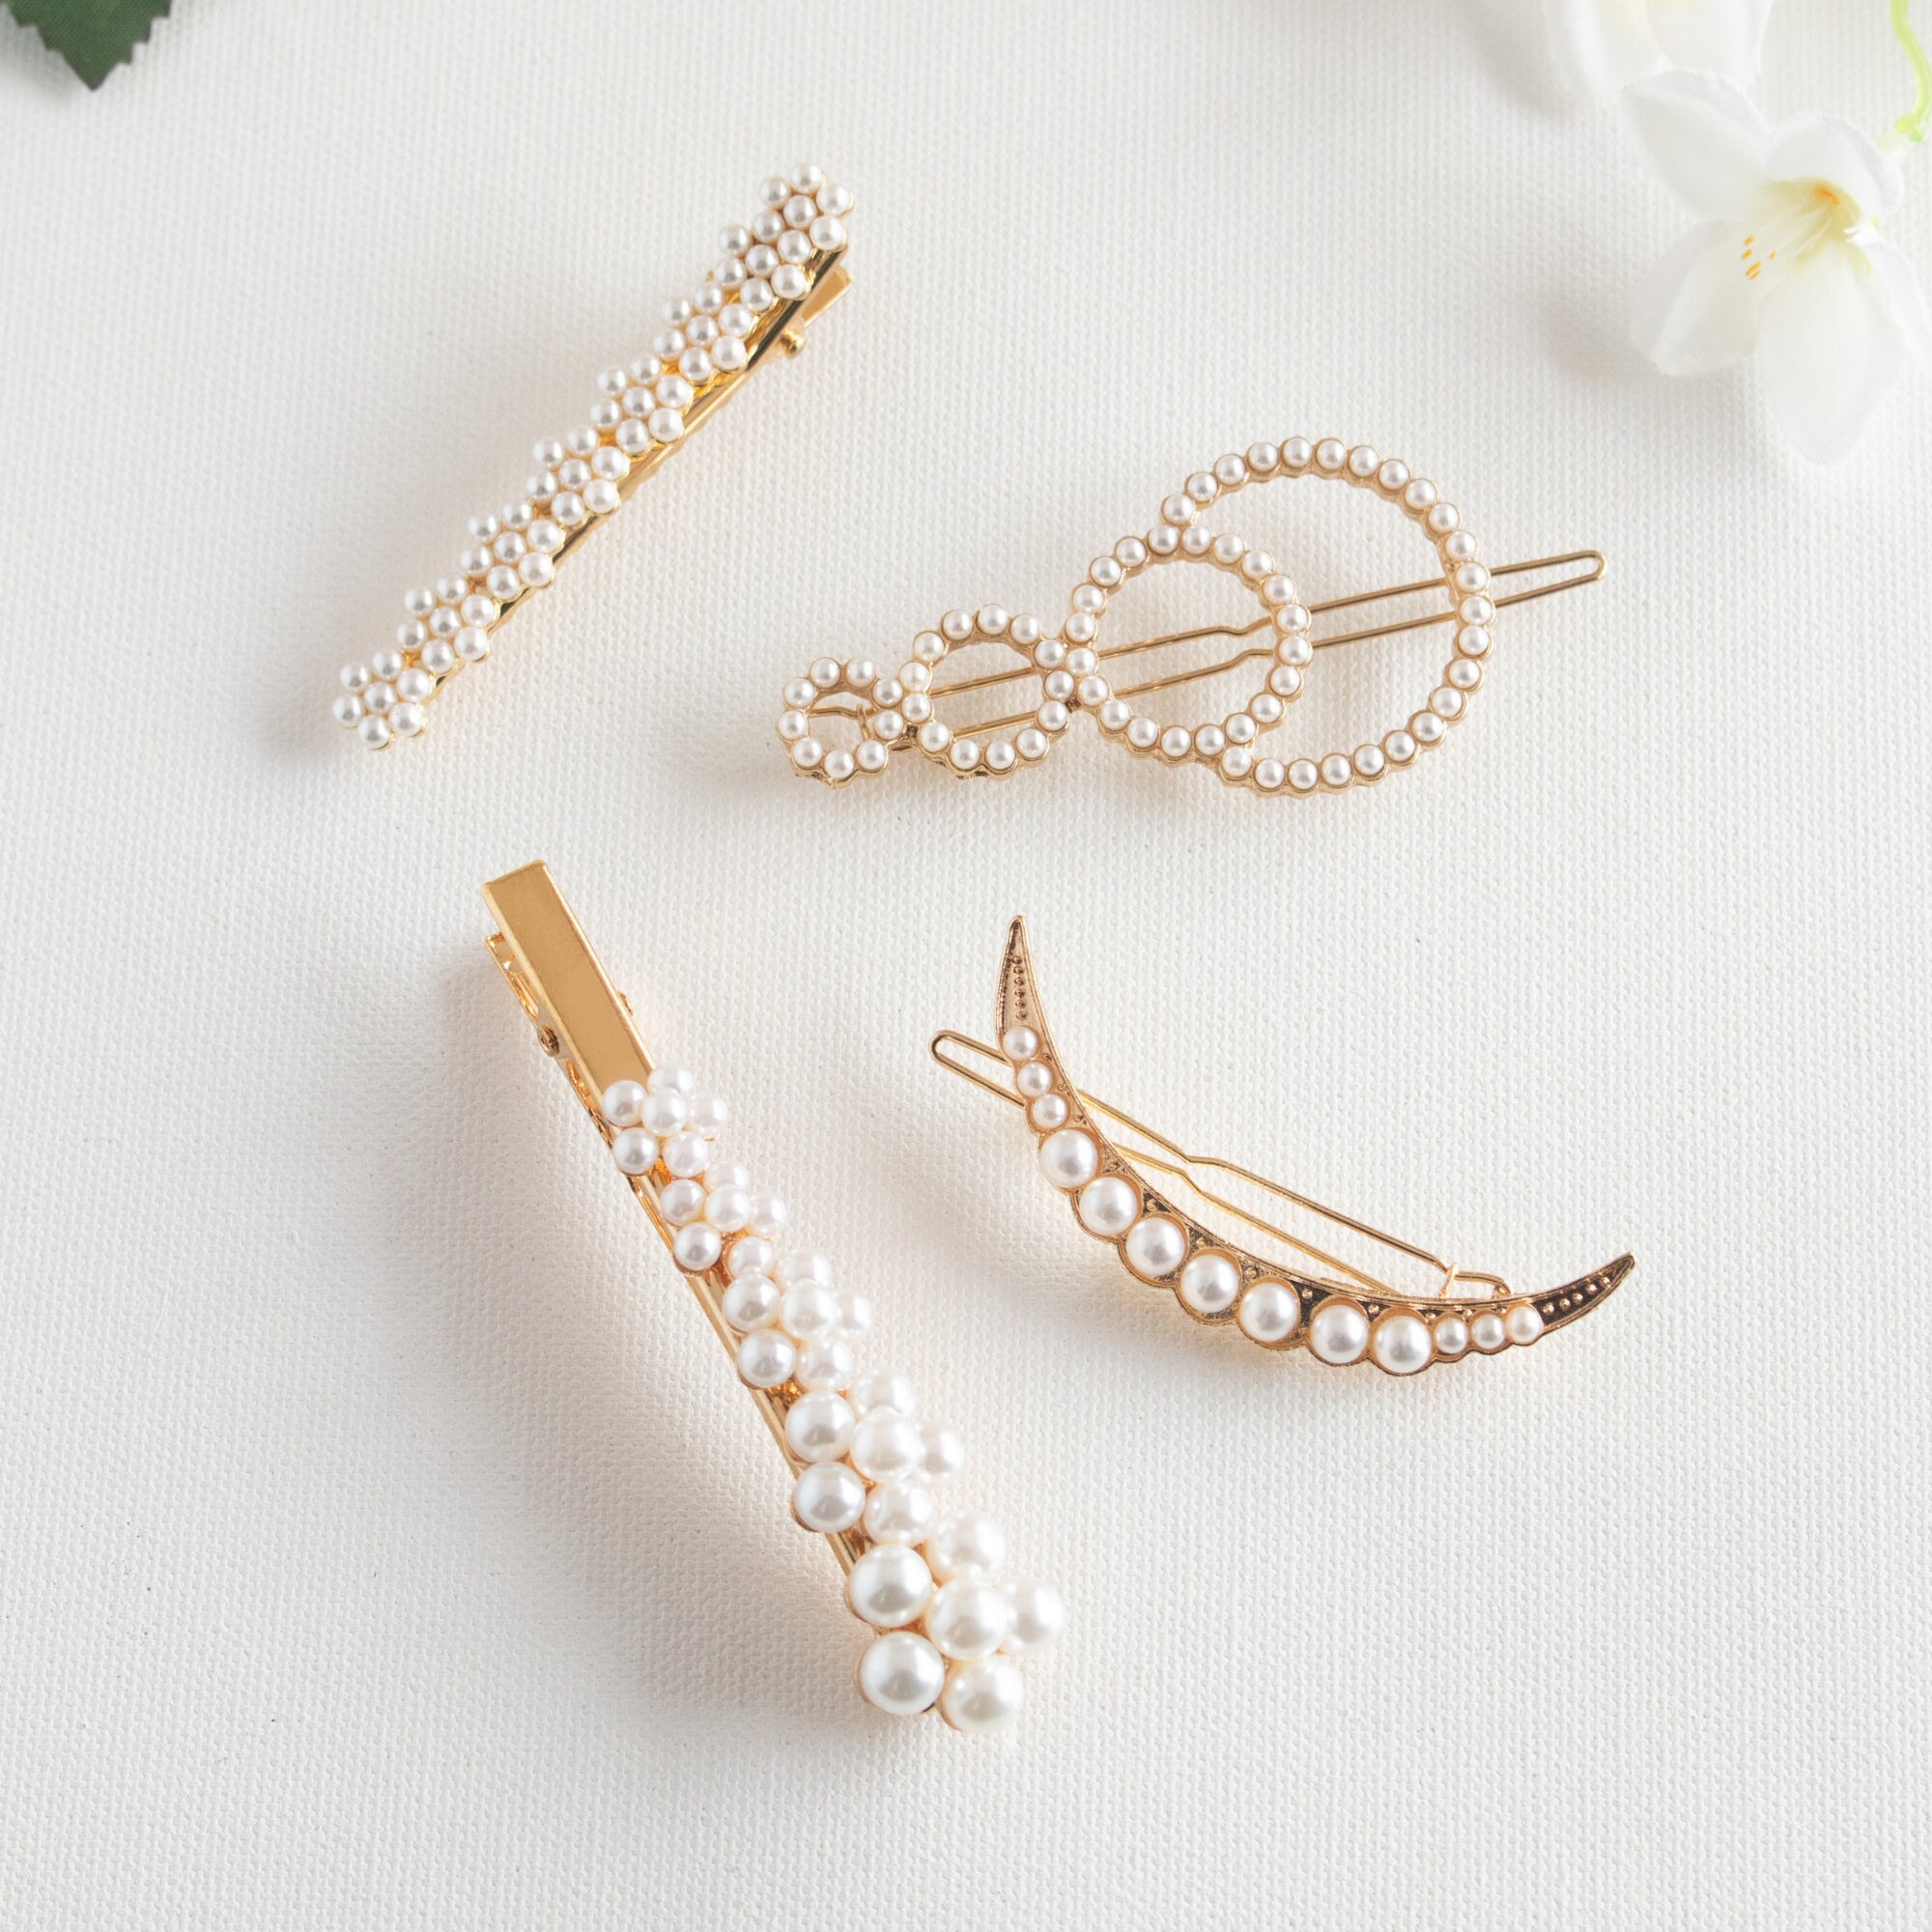 Starvis Fancy Bling Pearl Acrylic Hair Clips Accessories For Women, 4 Pcs